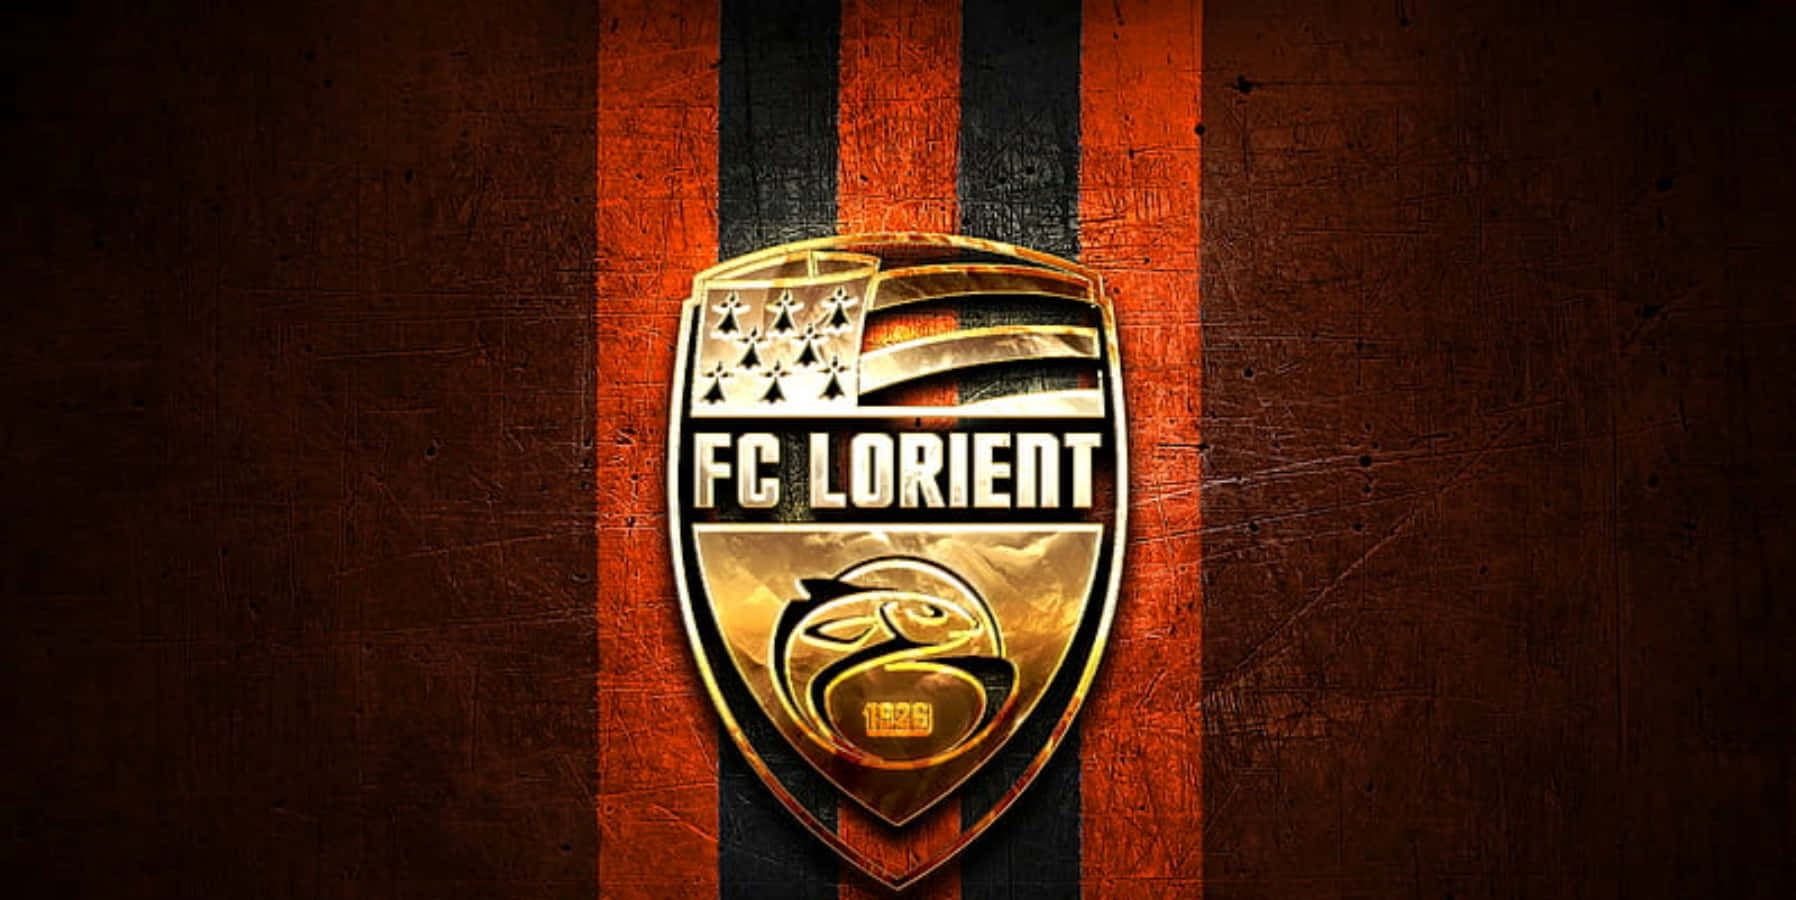 Caption: Exciting Action At Fc Lorient Football Match Wallpaper